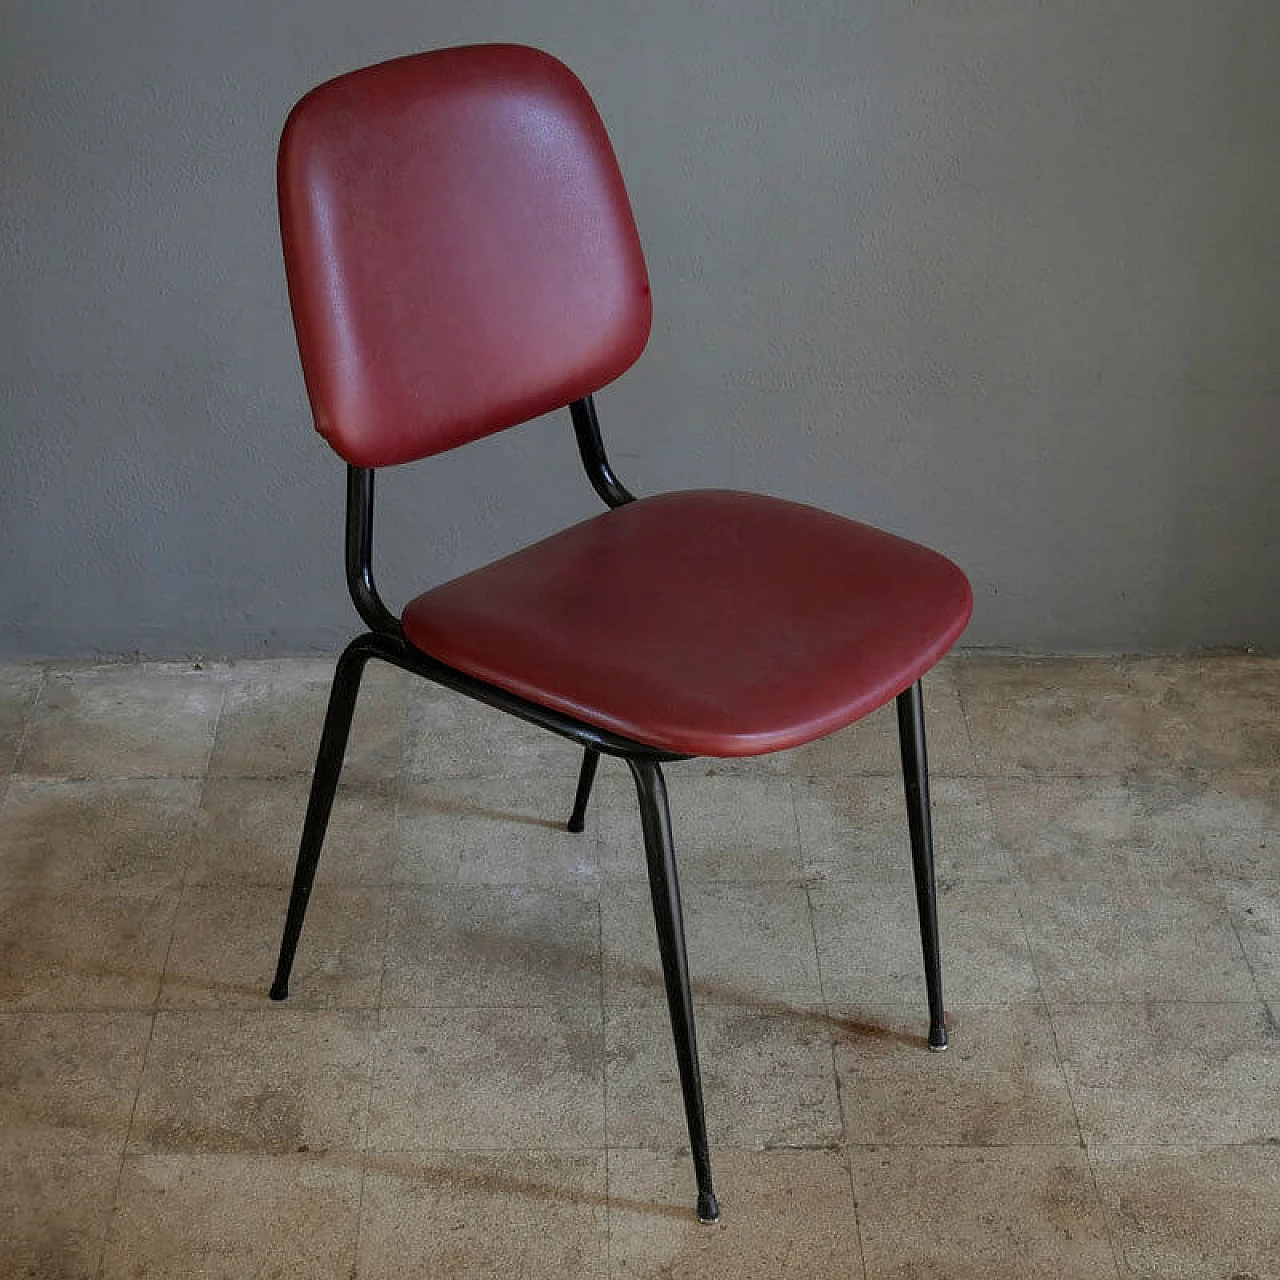 Theatre chairs from the 60s, eco-leather seat 4